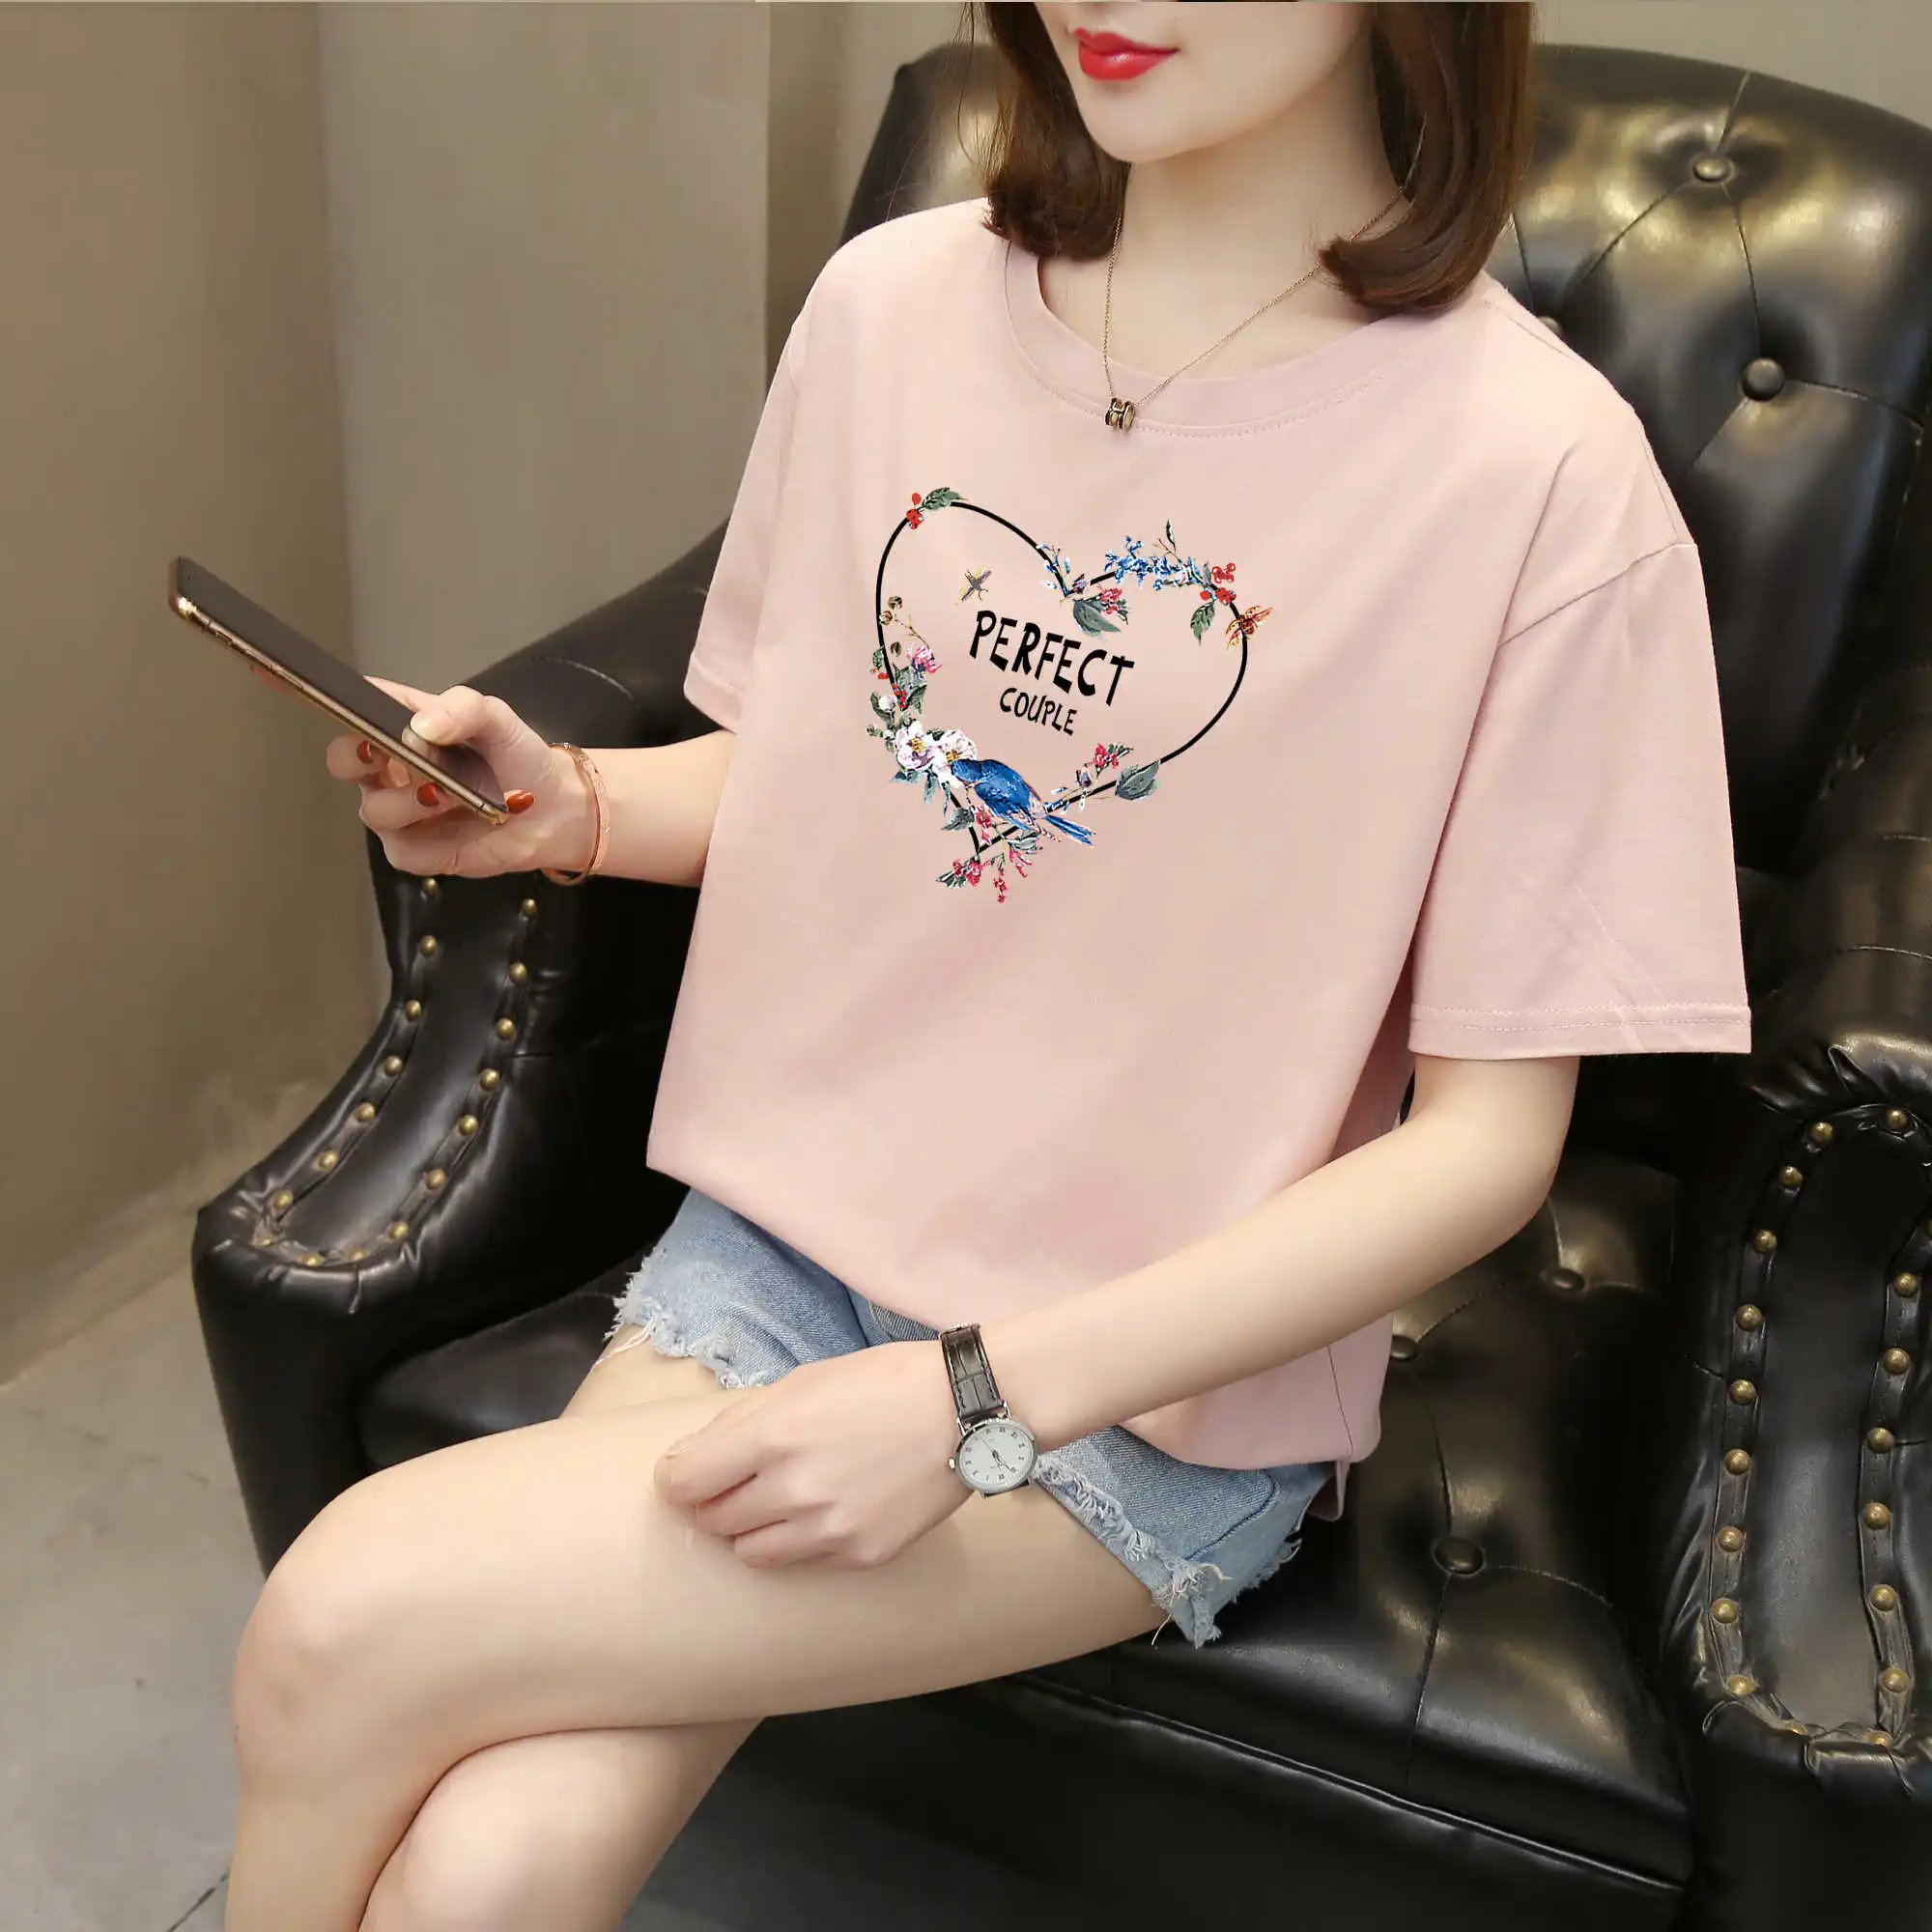 

New Summer Tops Women Floral Letters Print Tees Female Casual T Shirt Girls Tshirt Vintage Tops Camiseta Kawaii Blouse Clorhes